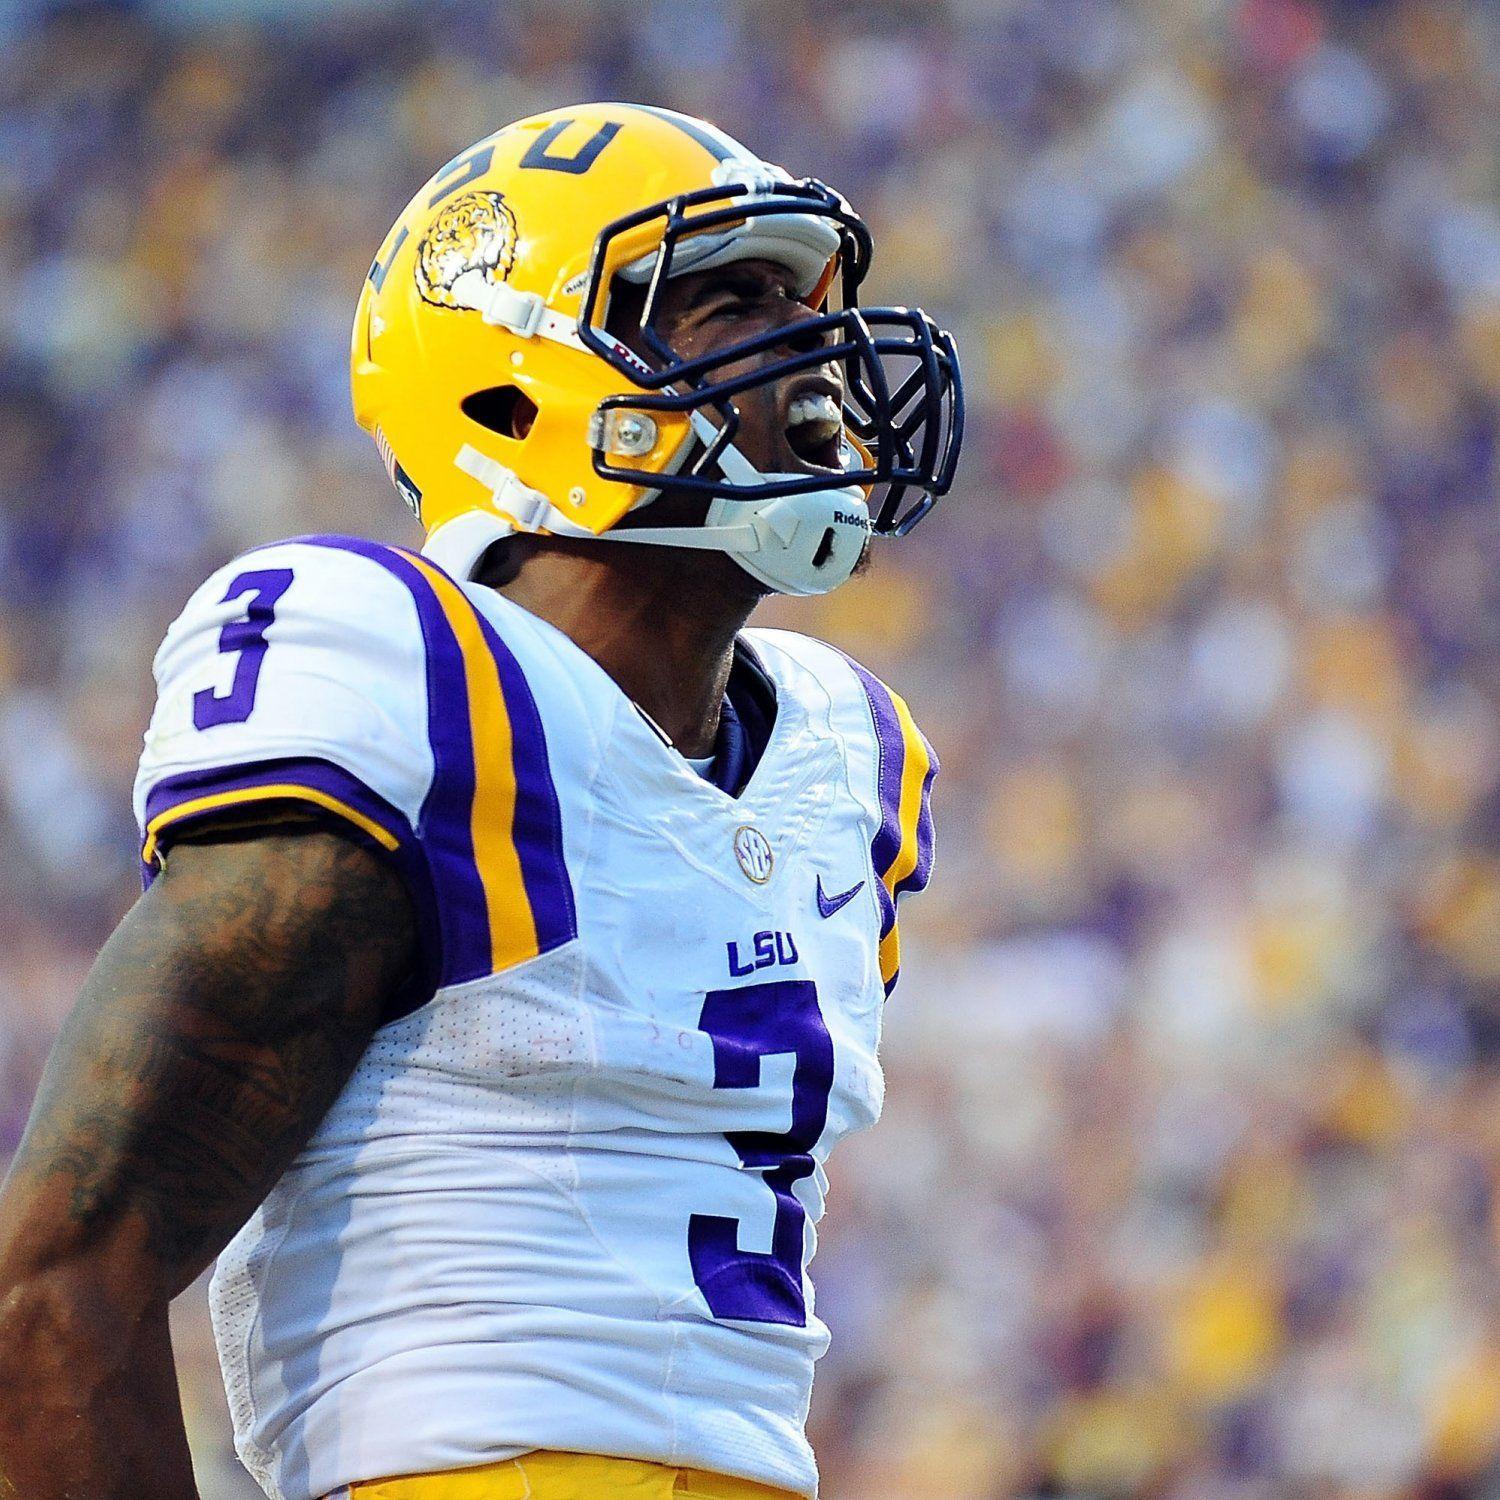 Wide receiver Odell Beckham, Jr. from Louisiana State University